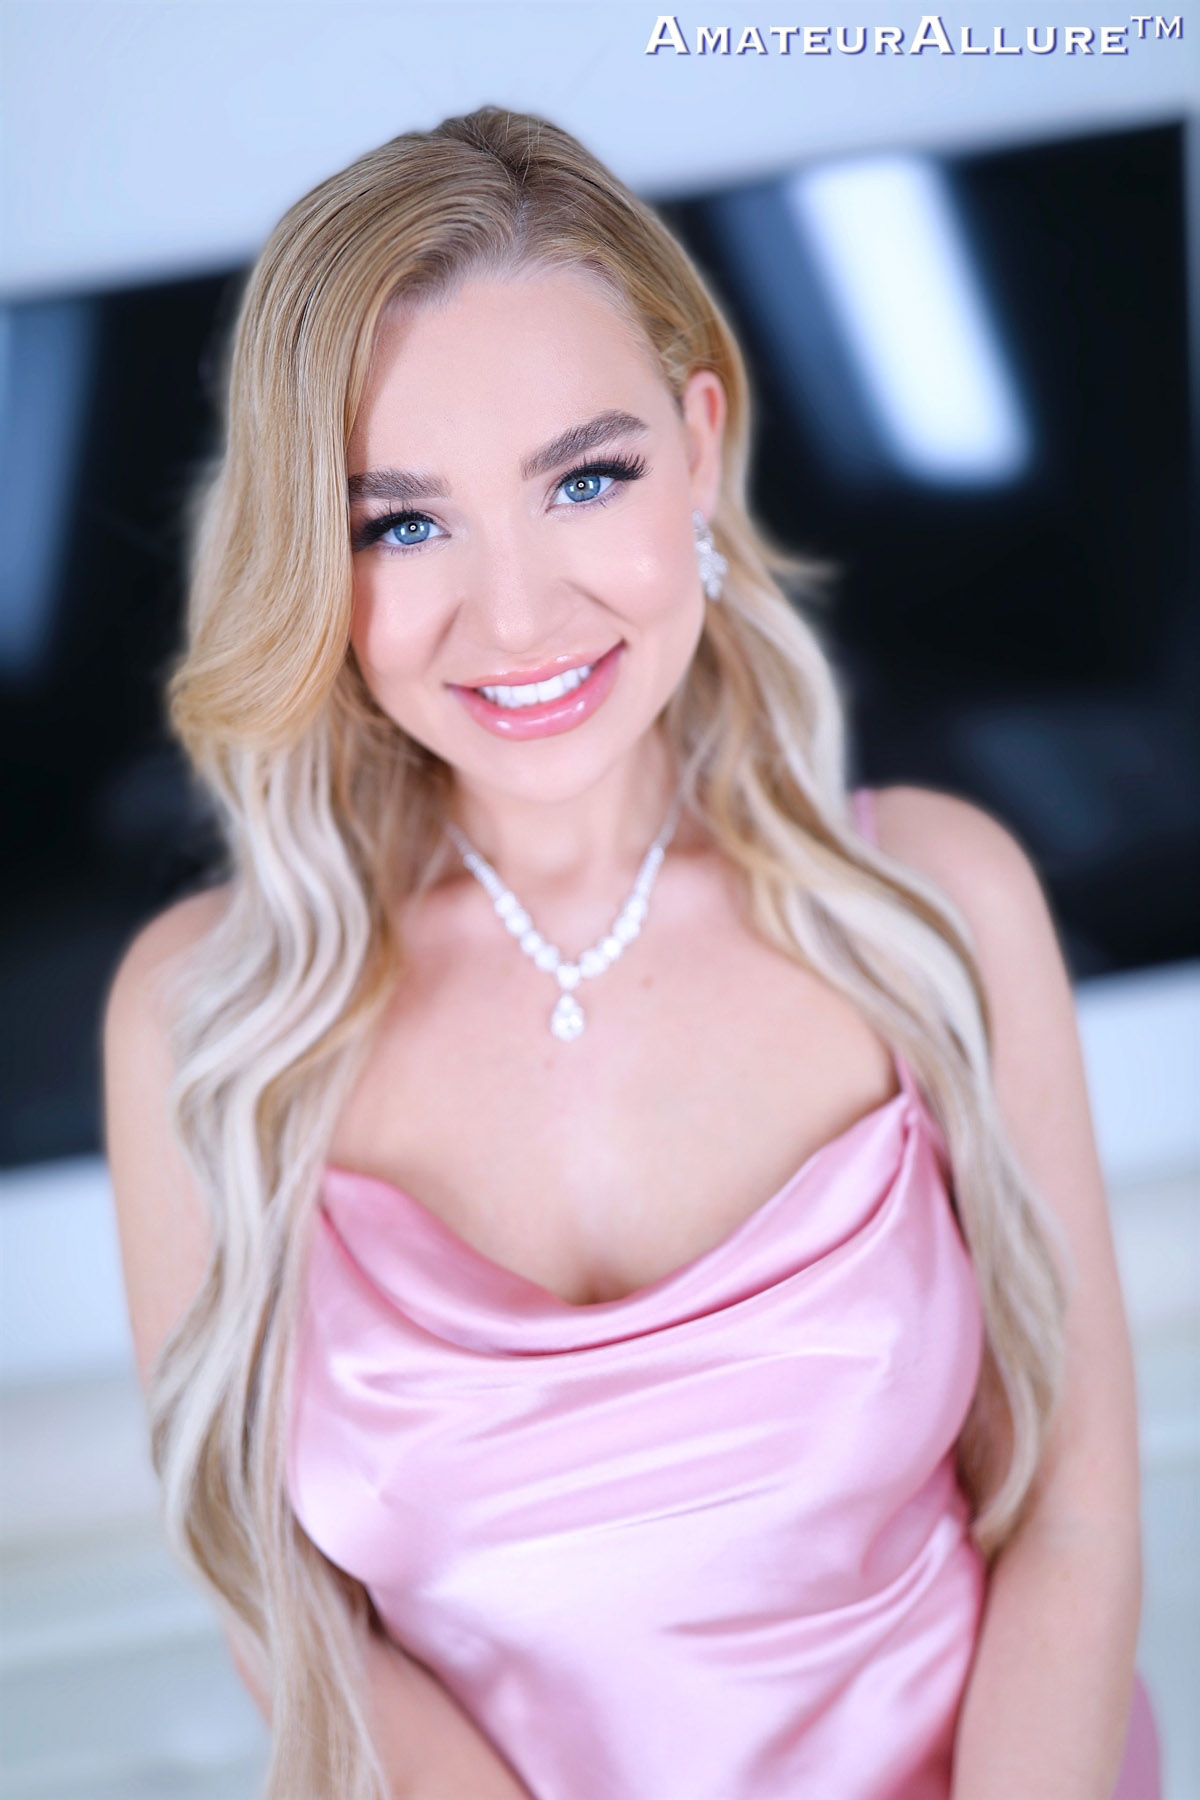 Blake Blossom at Amateur Allure picture